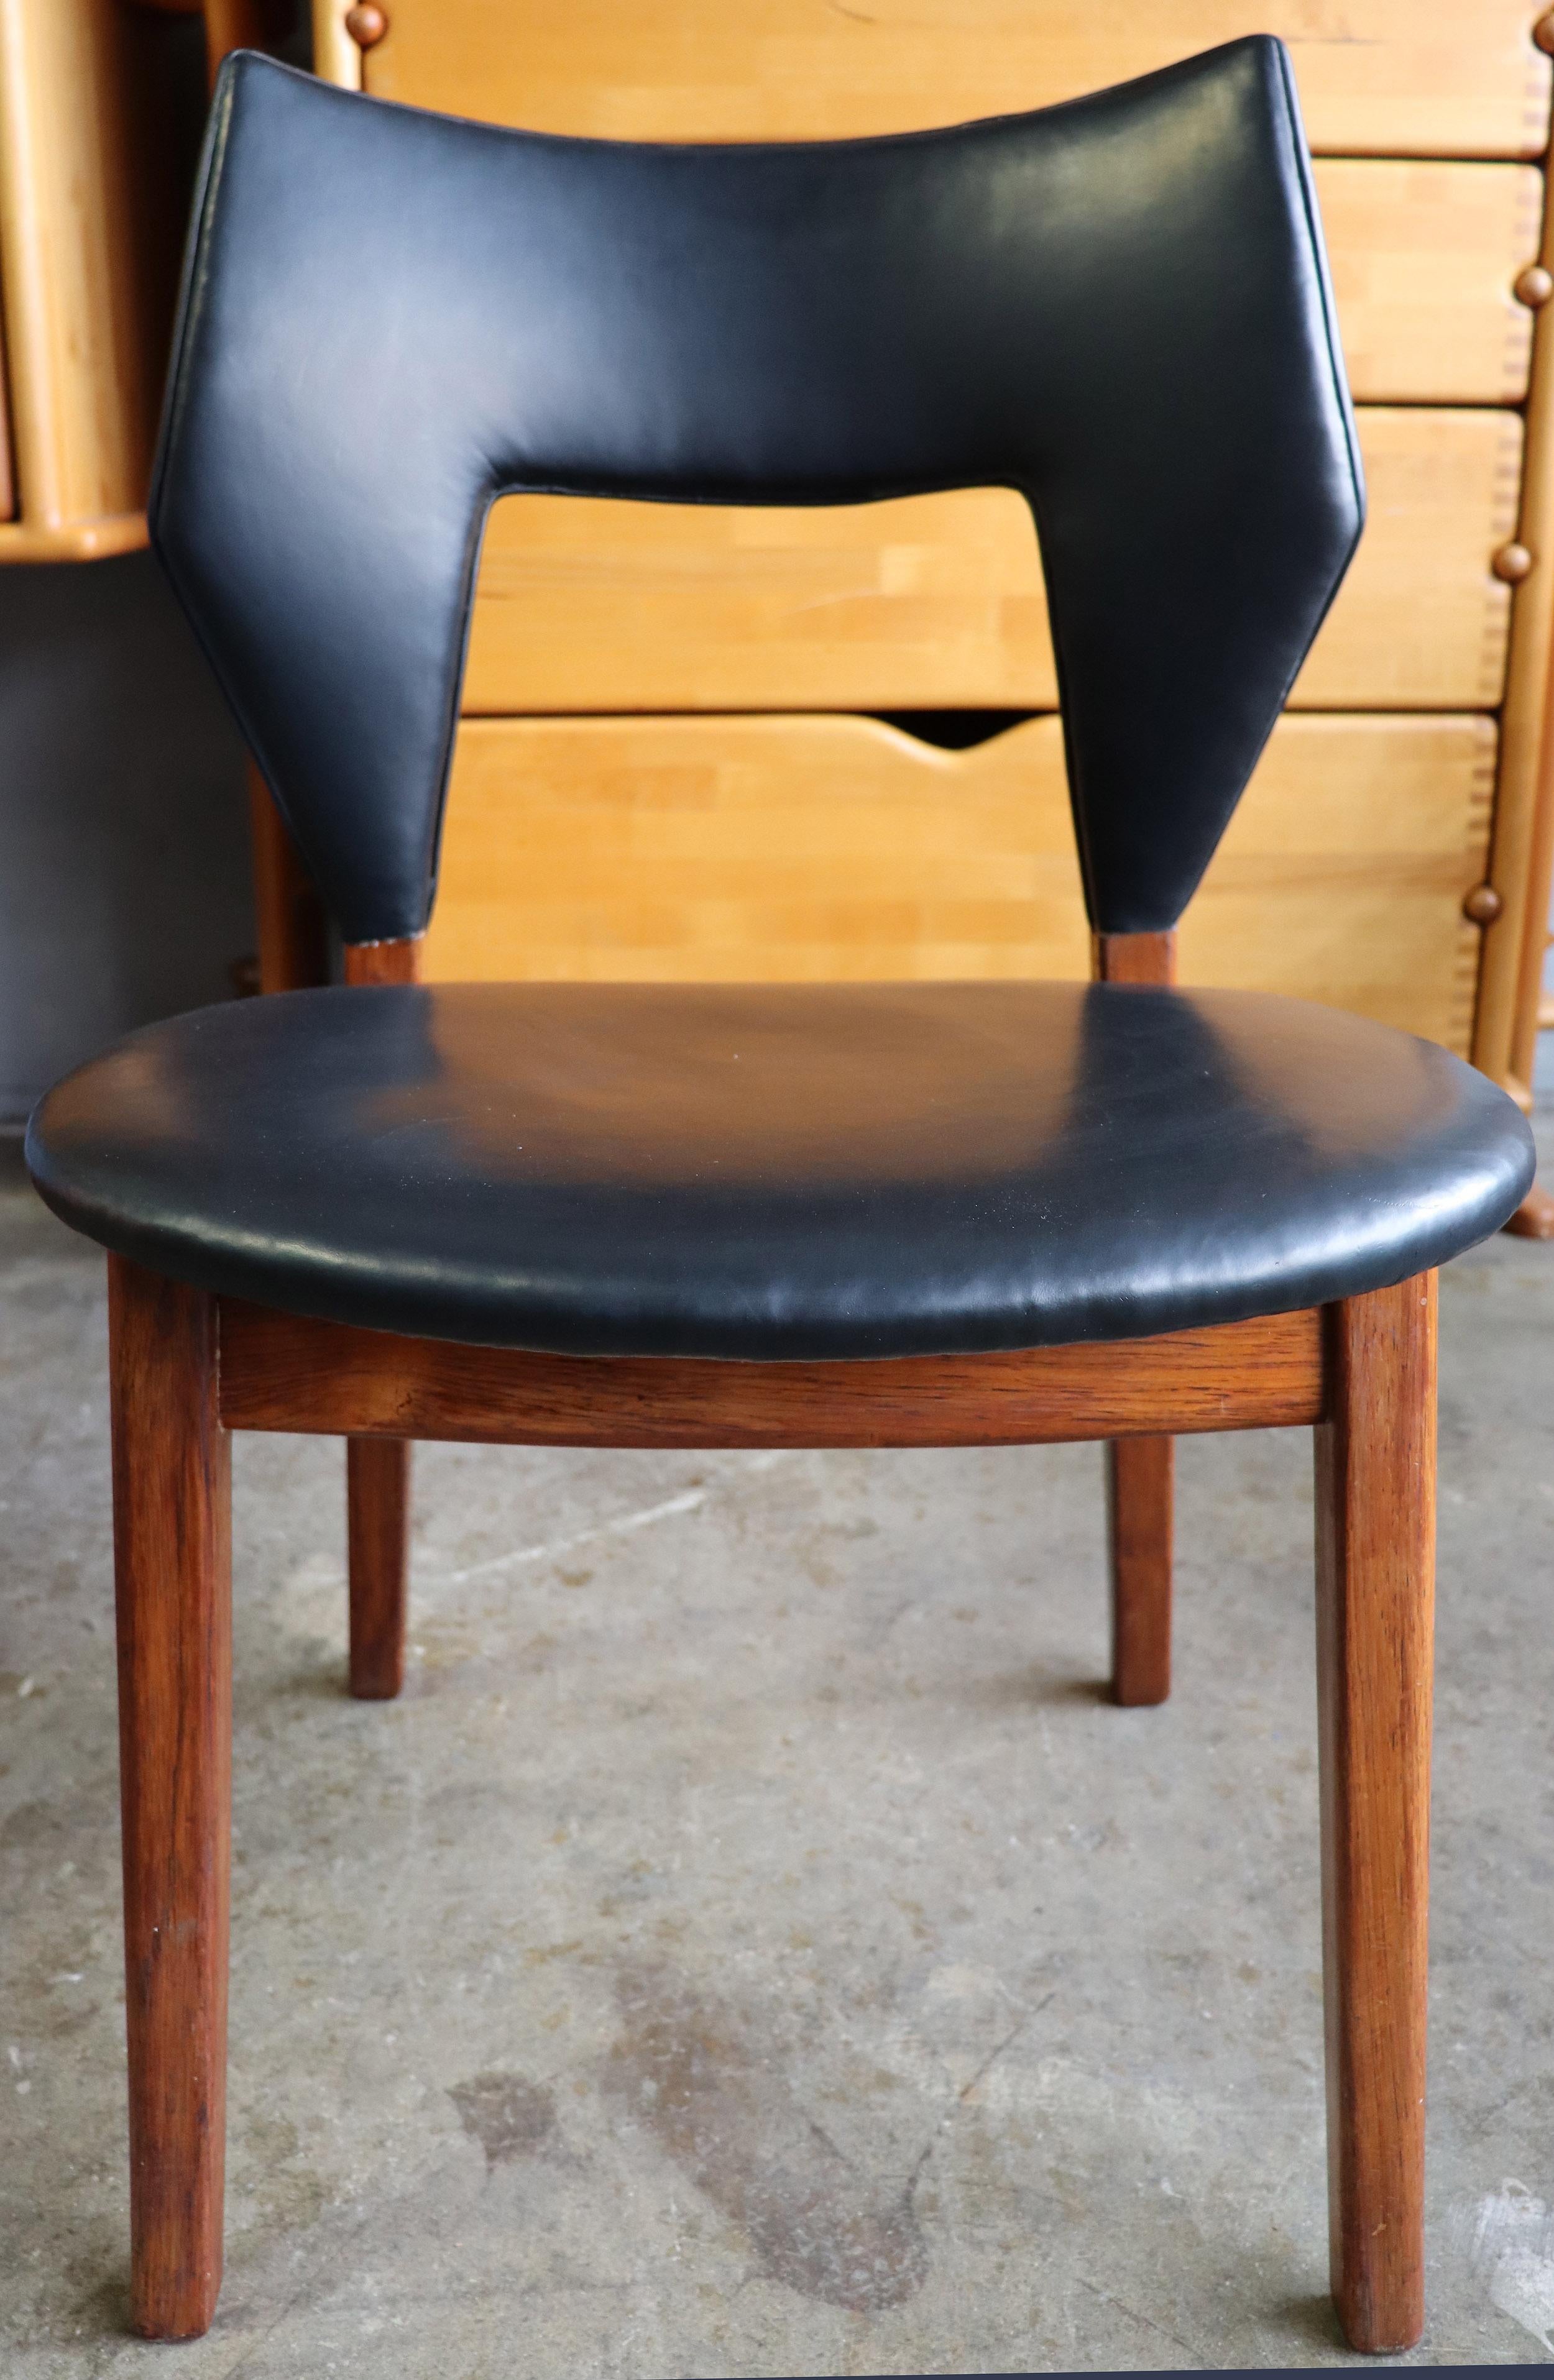 For your consideration is this fine and rare Danish modern Tove & Edvard Kindt-Larsen Chair for Thorald Madsens and Svend Madsen. Featuring original black leather on rosewood frame. Retains brass label on underside. In good condition and ready for